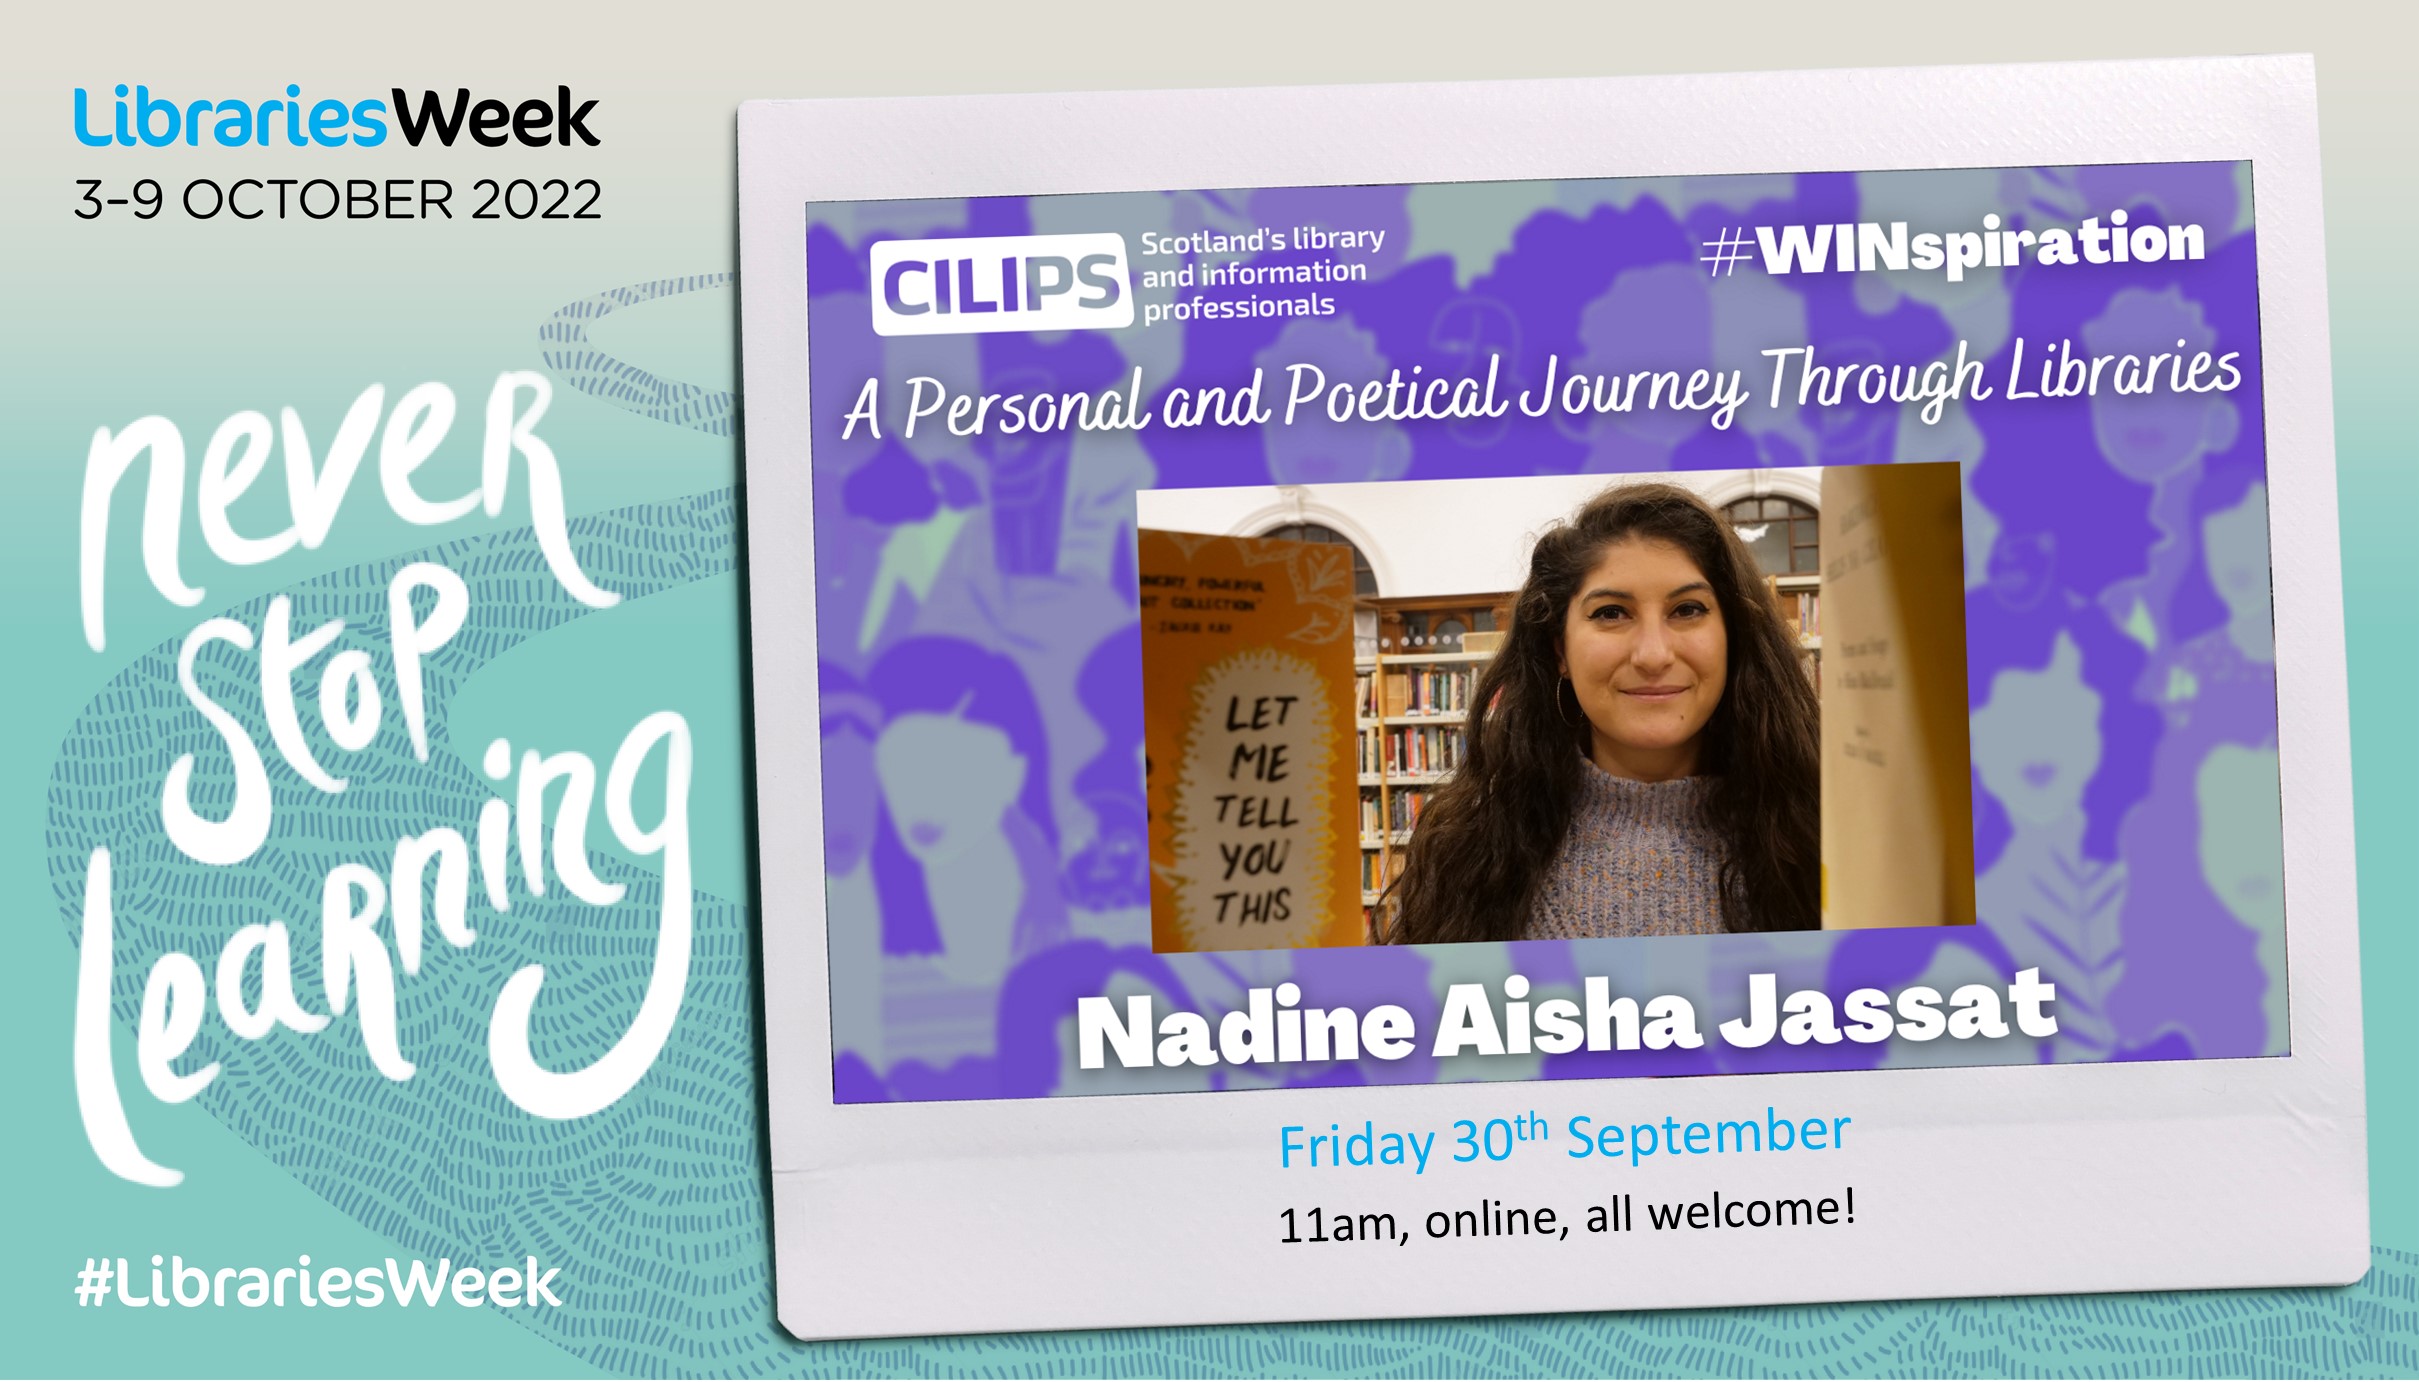 A Personal and Poetical Journey Through Libraries with Nadine Aisha Jassat logo, showing a photograph of Nadine beside the WINspiration and Libraries Week logos, with text reading Friday 30th September, 11am, online, all welcome!